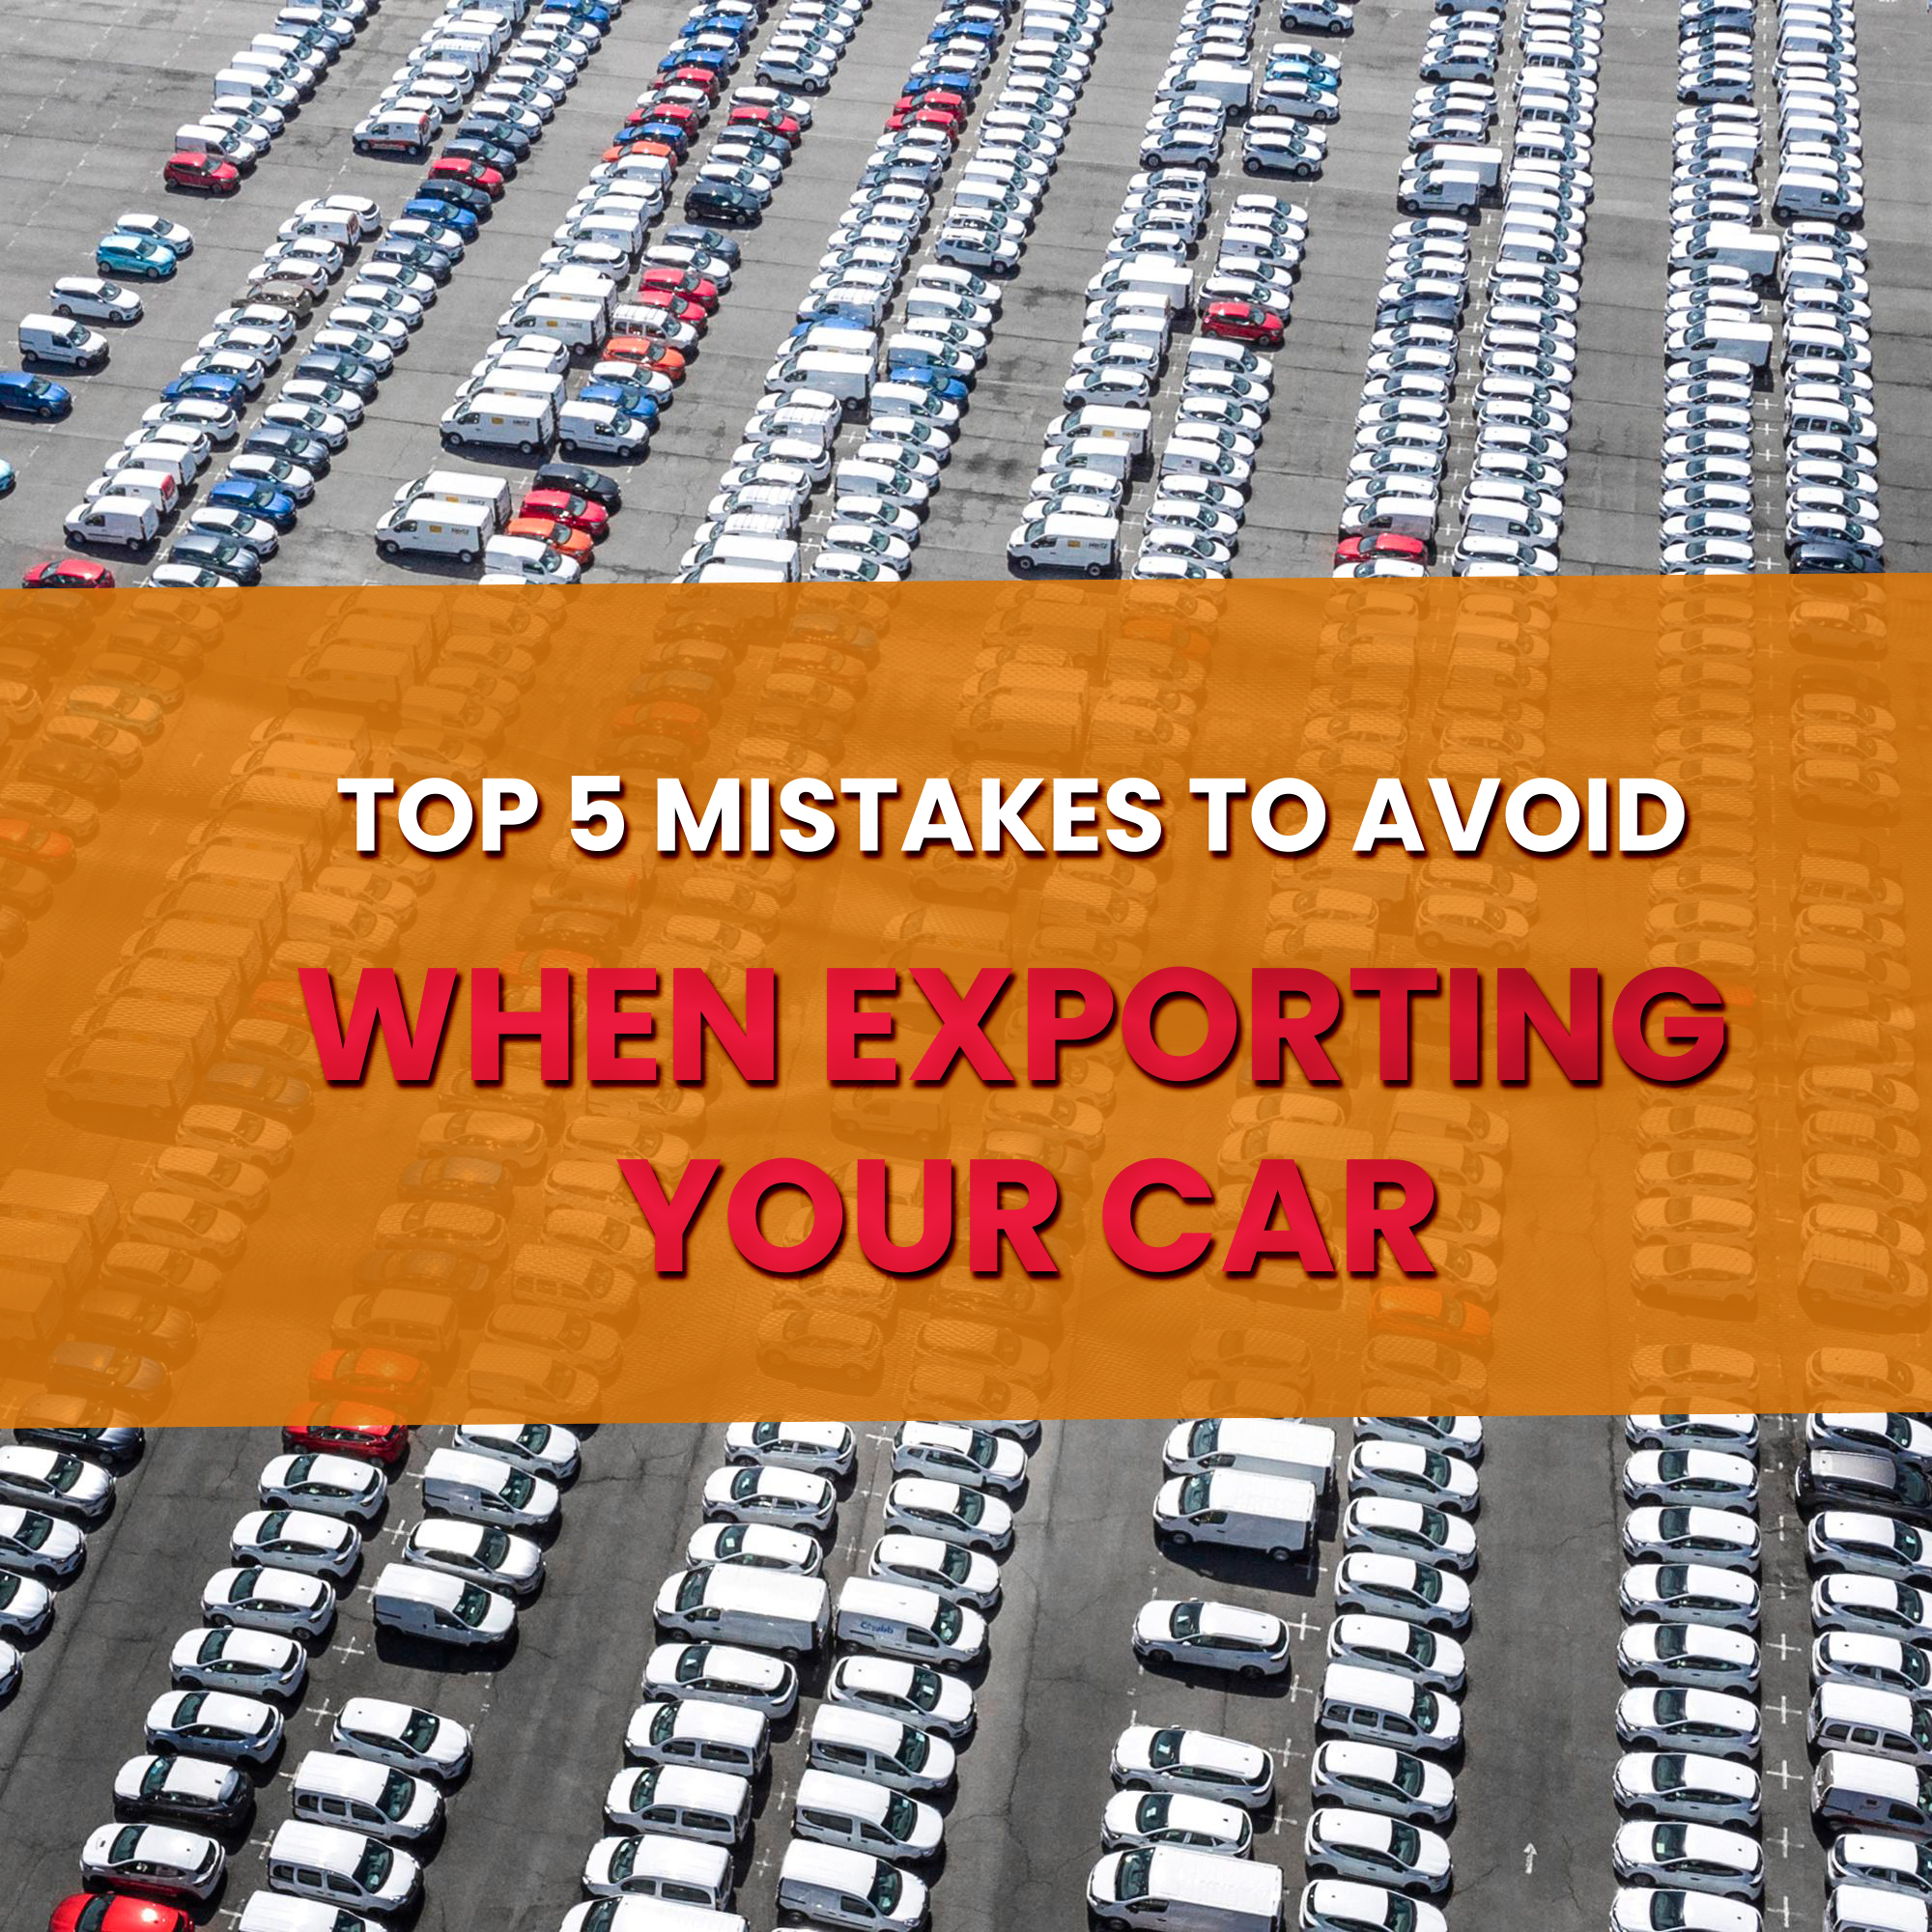 Top 5 Mistakes to Avoid When Exporting Your Car